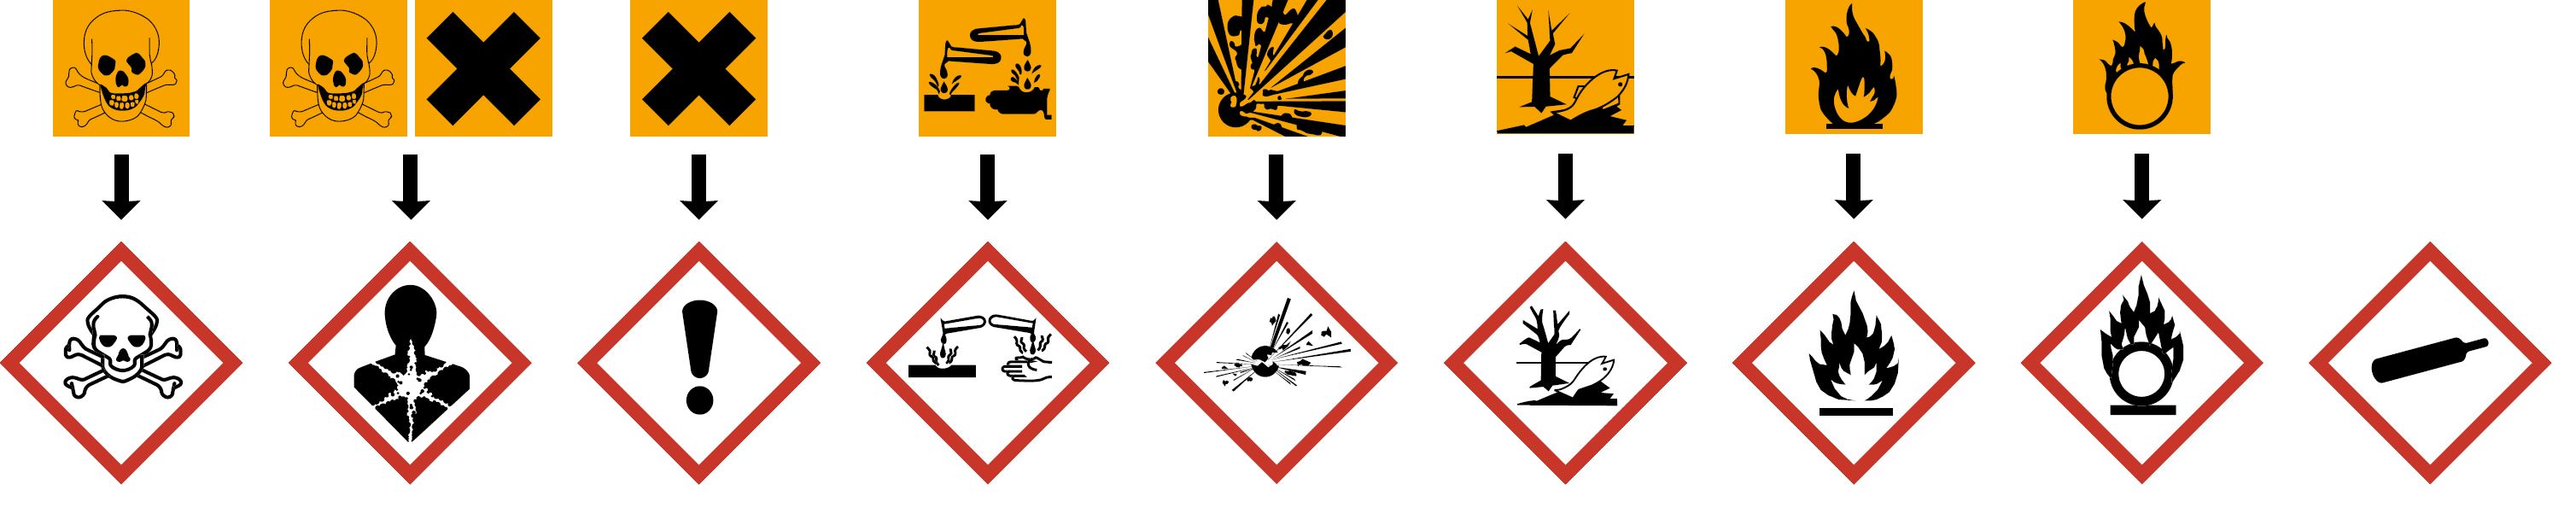 Warning signs indicating hazardous waste, such as corrosive, acute toxicity, compressed gas